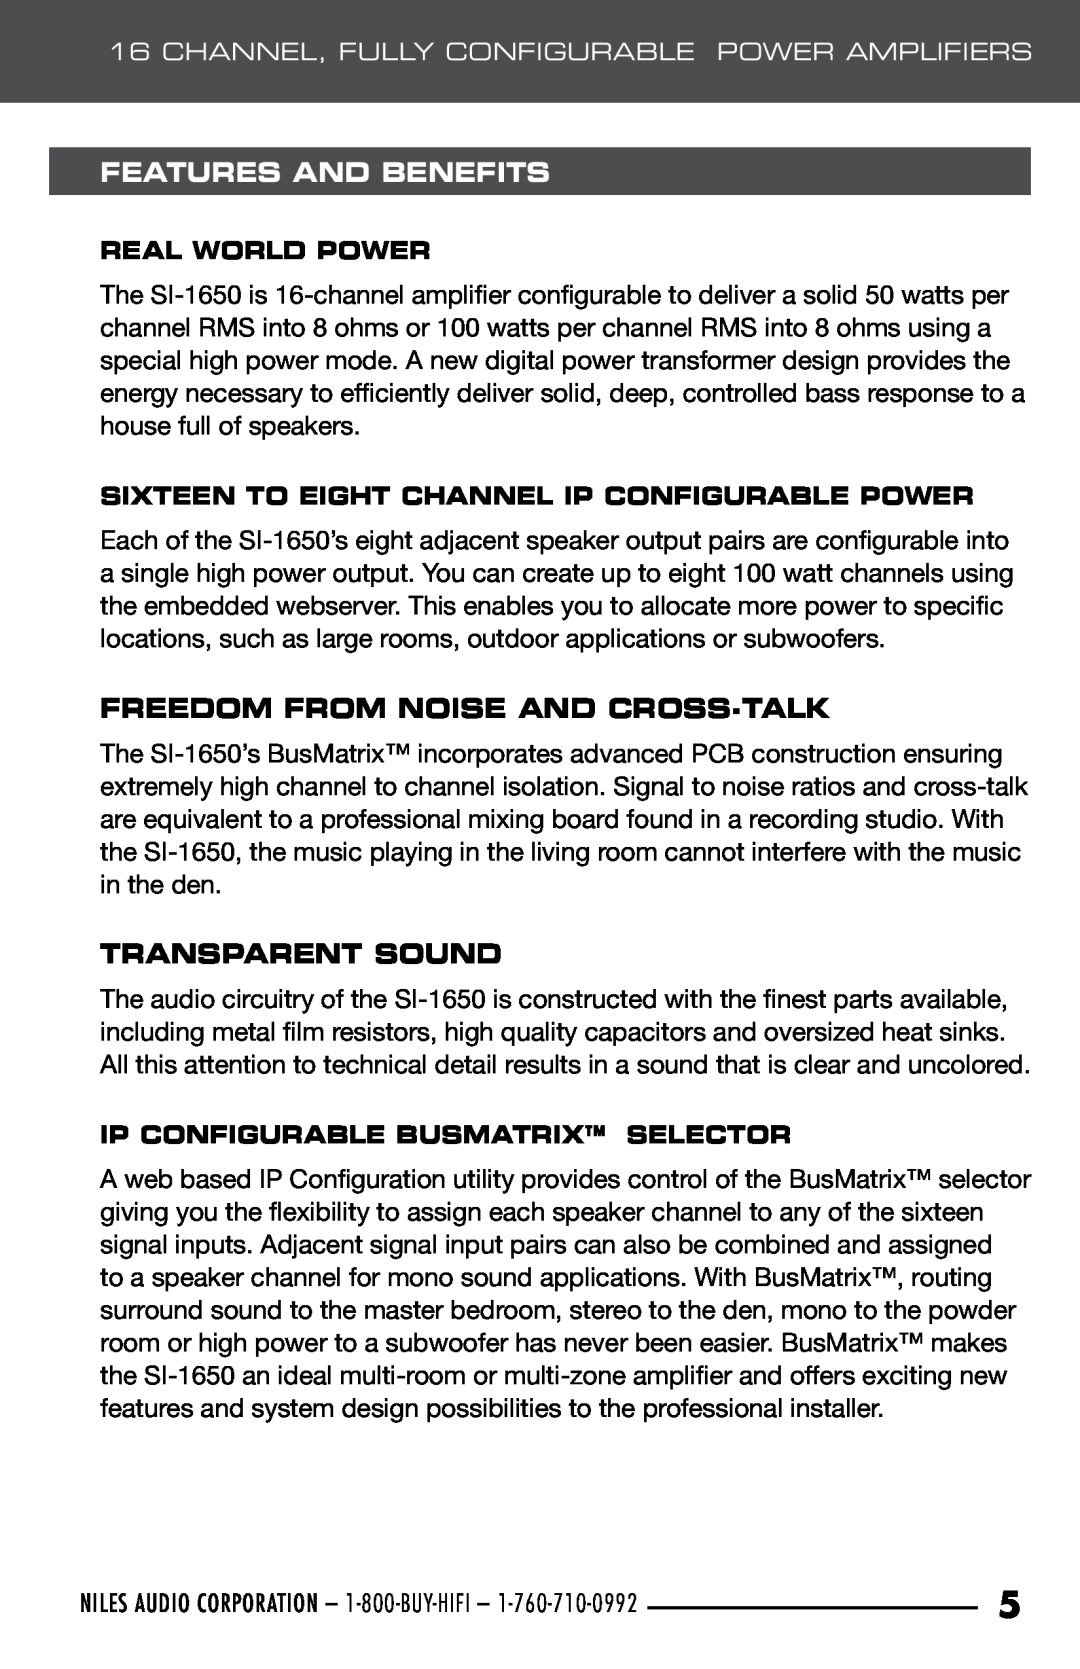 Niles Audio SI-1650 manual Features And Benefits, Freedom From Noise And Cross-Talk, Transparent Sound 